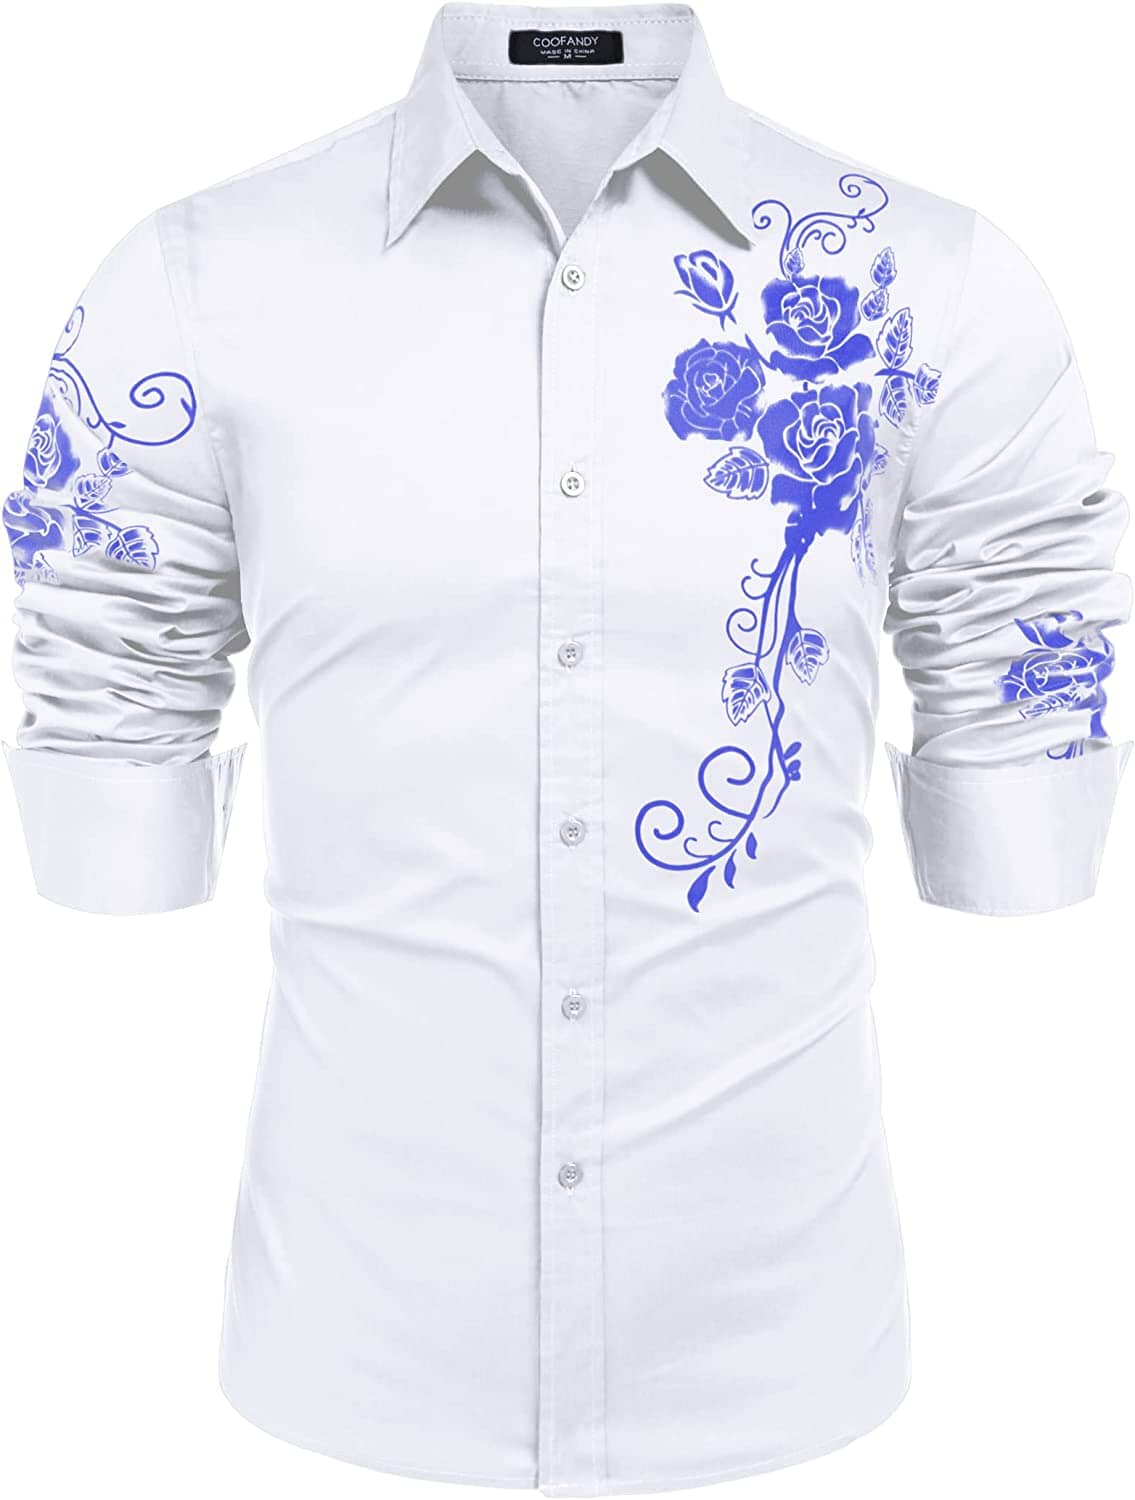 Rose Printed Slim Fit Dress Shirts (US Only) Shirts coofandy White (Blue Rose) S 